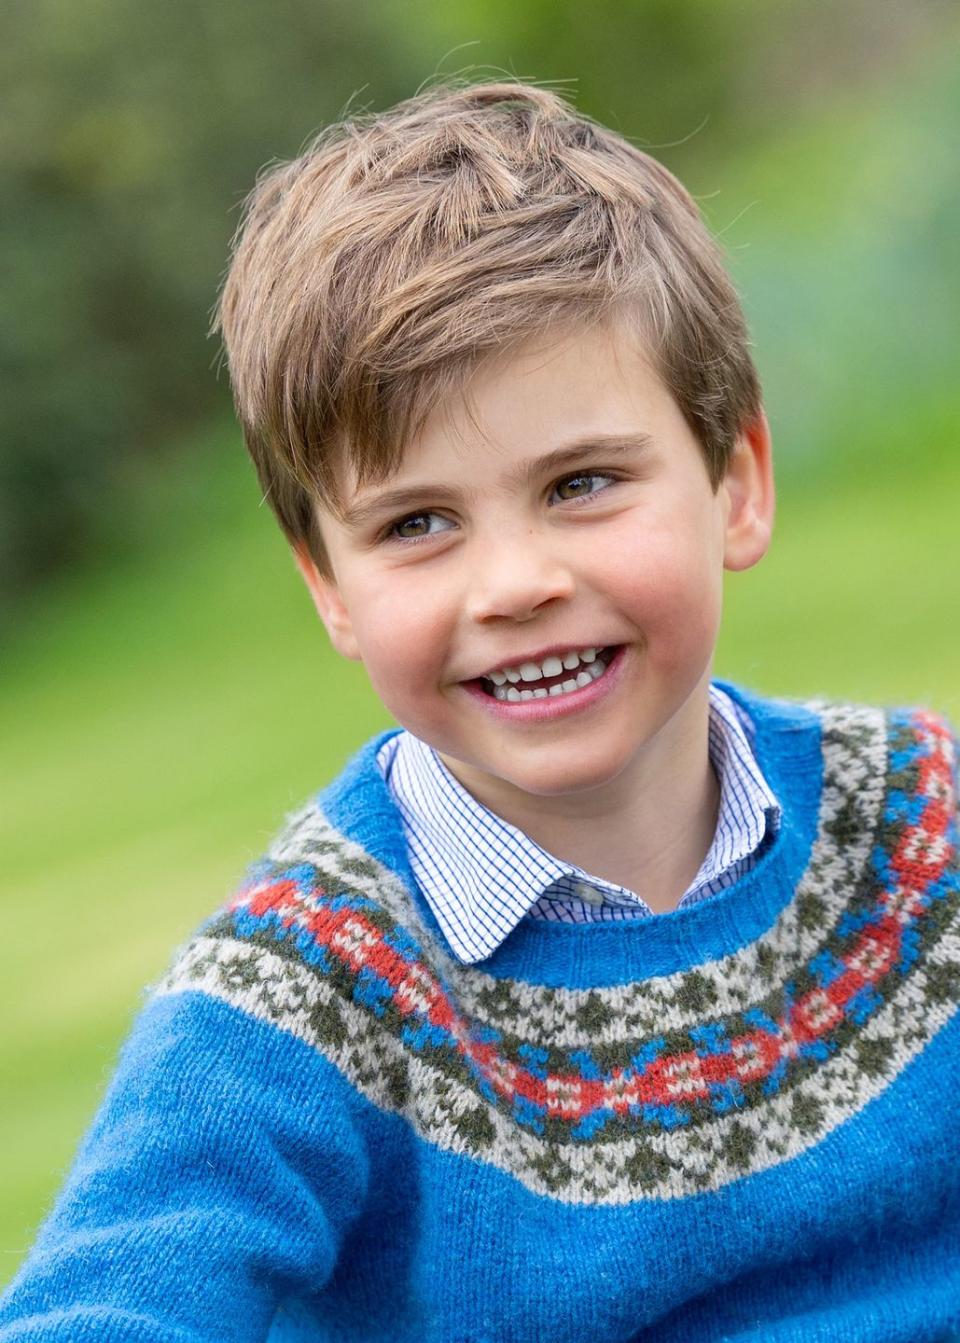 Prince Louis Turns 5! See the Adorable New Photos of Prince William and ...